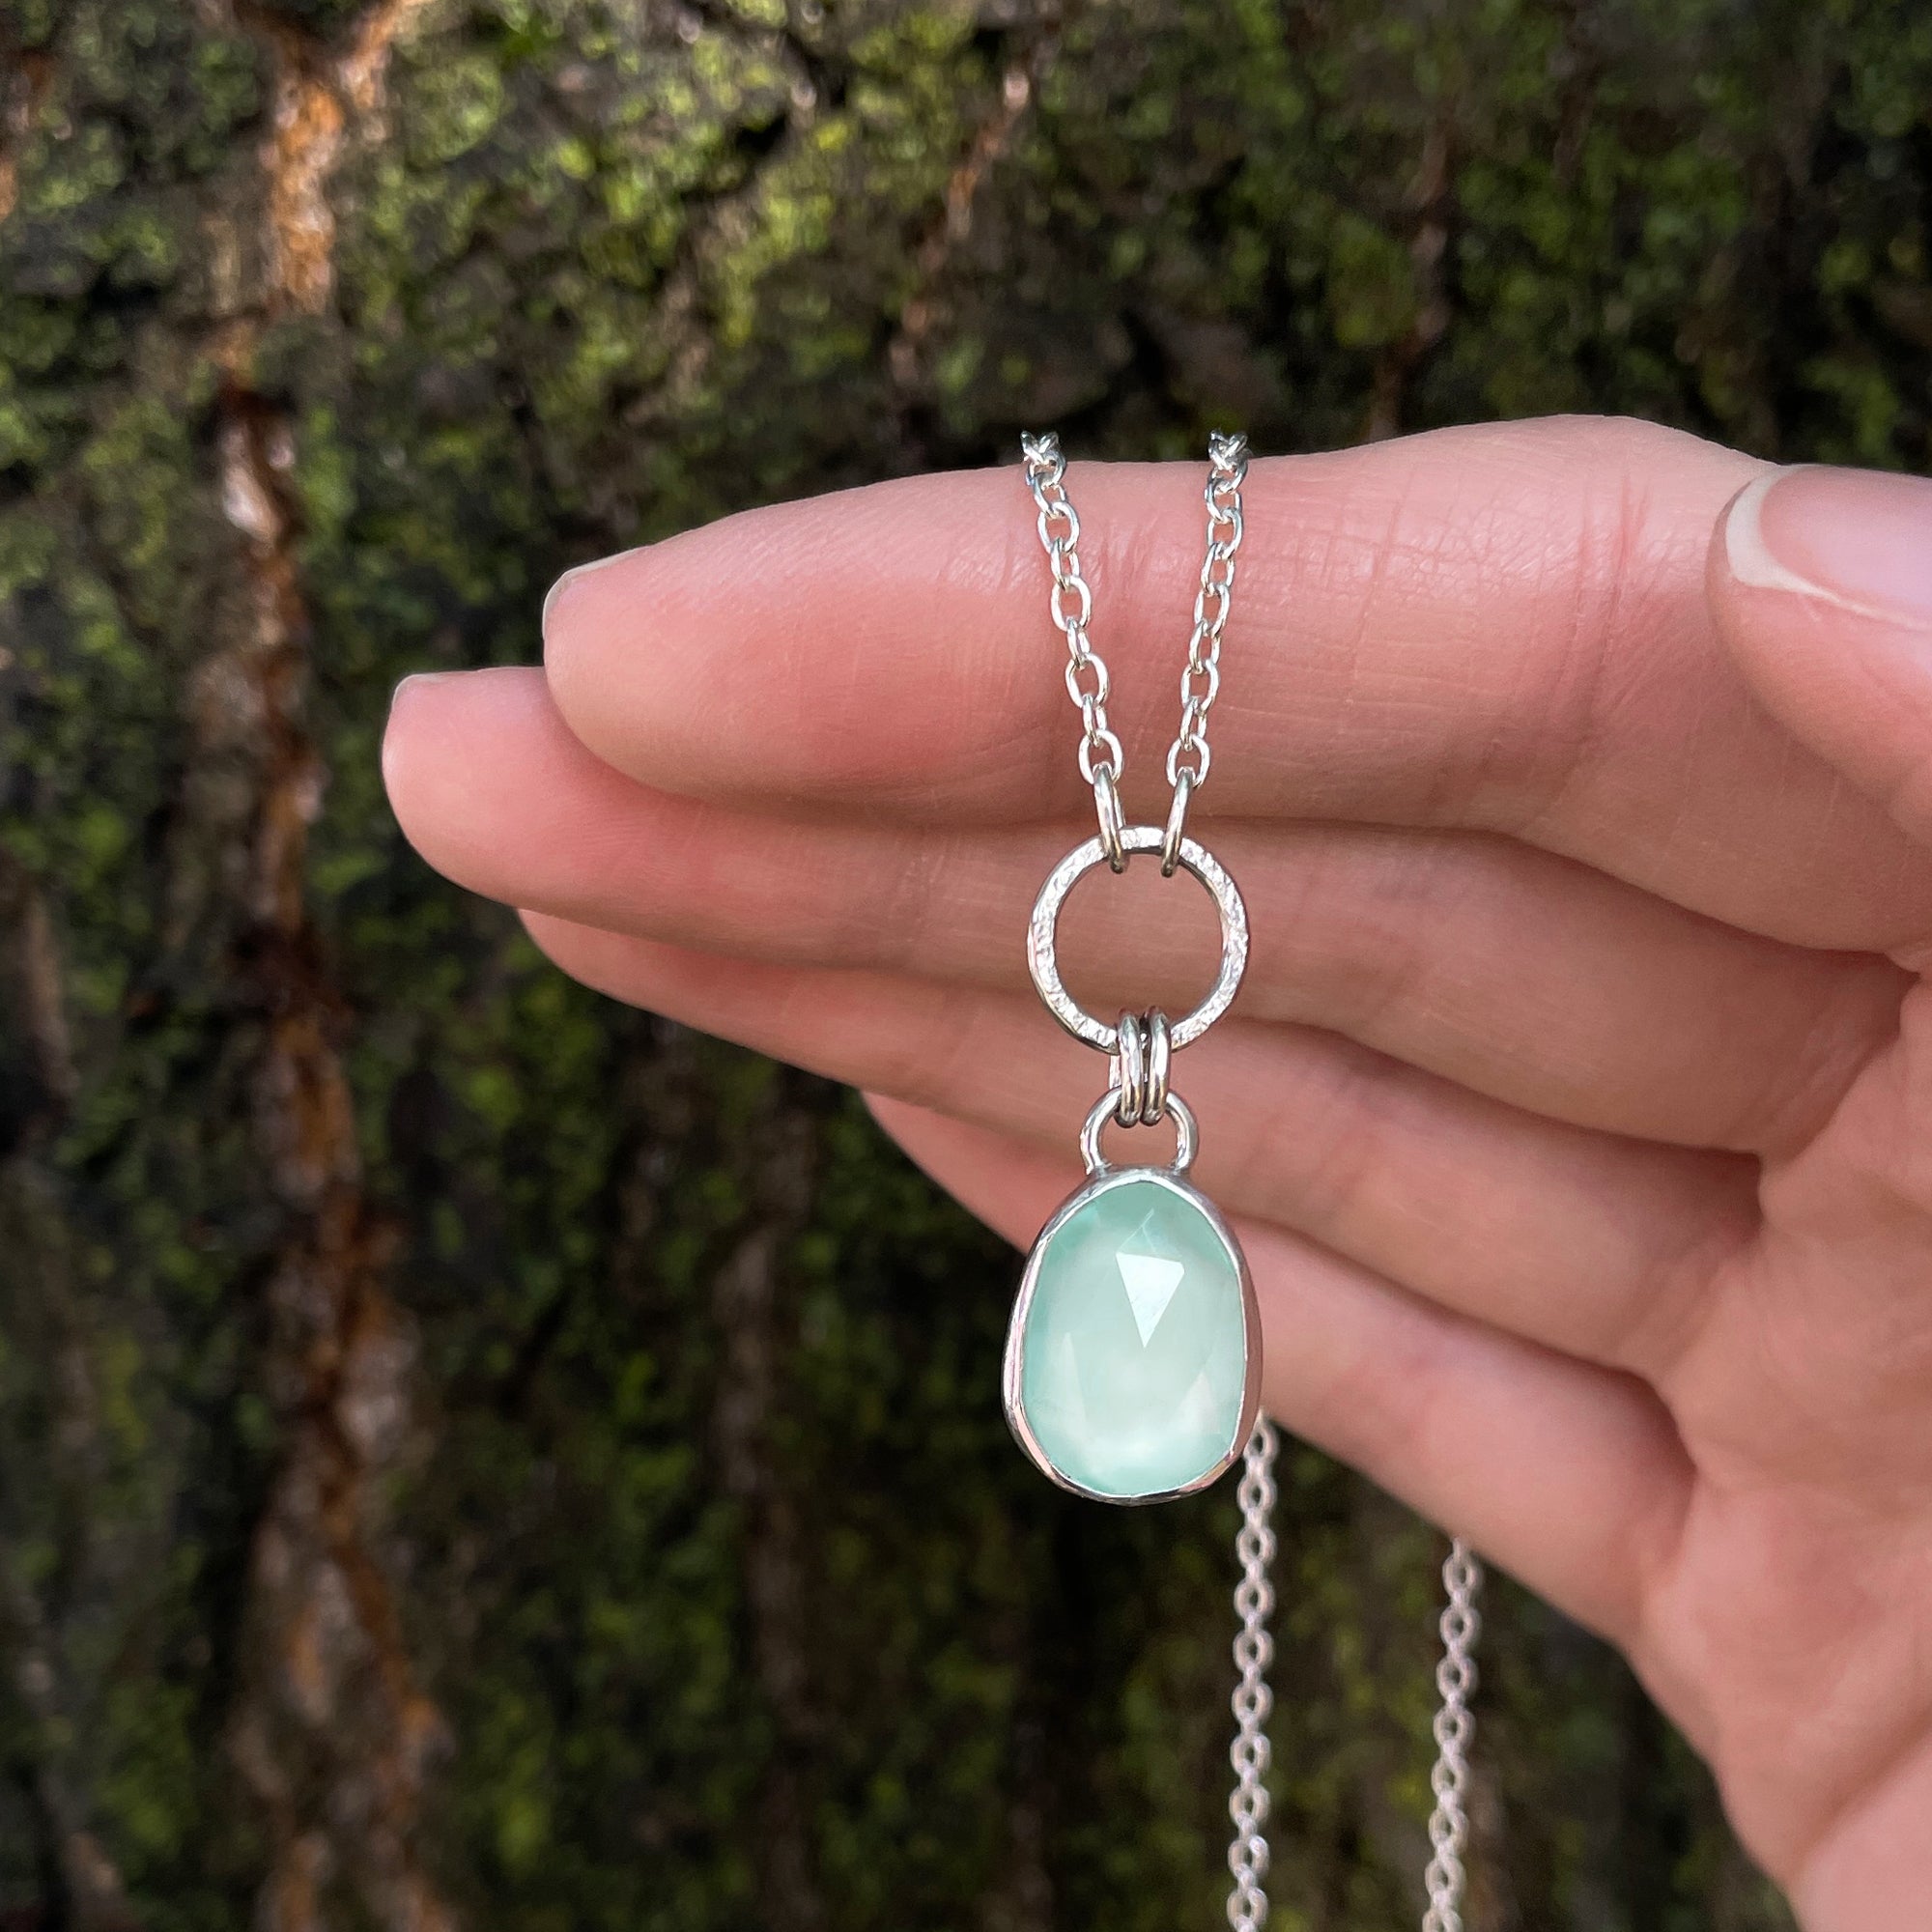 Balance Necklace - Rose Cut Chalcedony - Bright Sterling